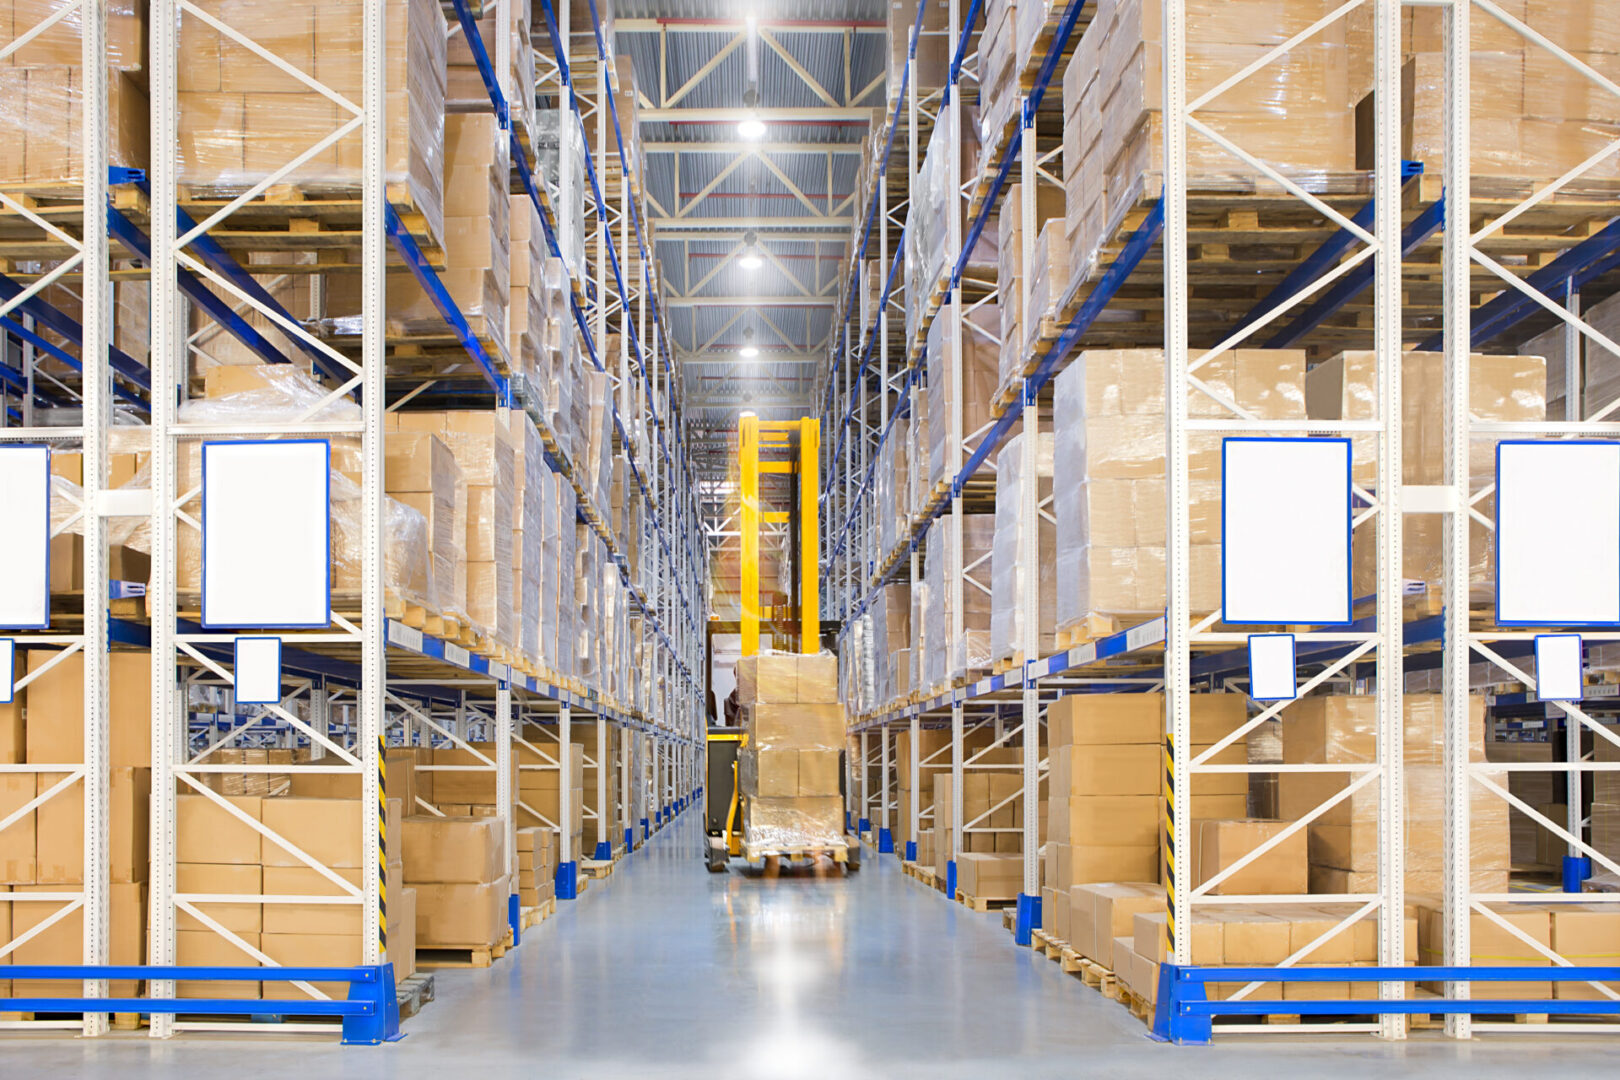 A large distribution warehouse with yellow forklift